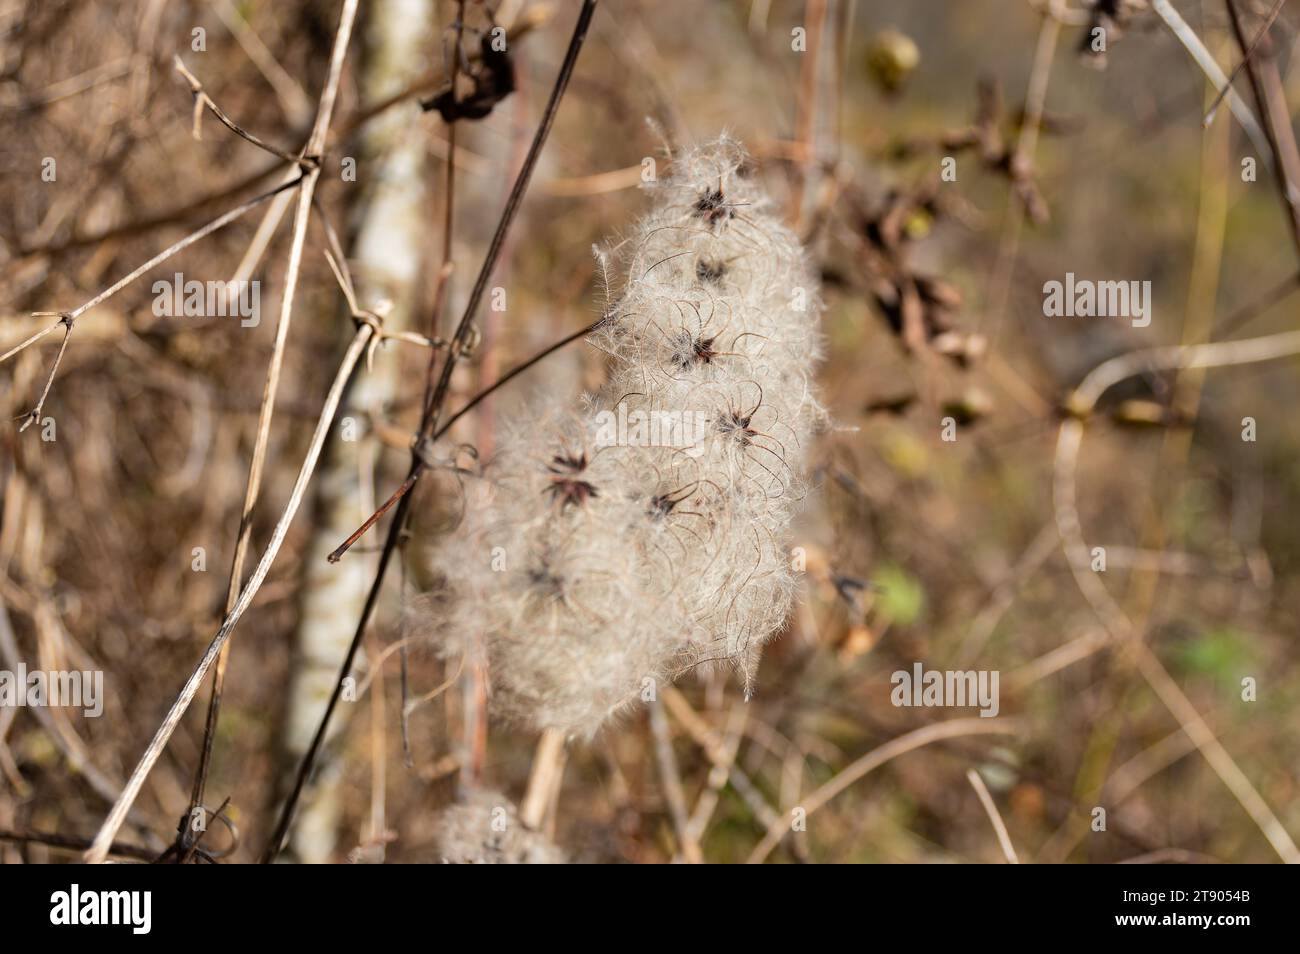 The seeds of a plant of Clematis vitalba (known as old man's beard and traveller's joy) as seen in the fall season near the Alps of northern Italy Stock Photo